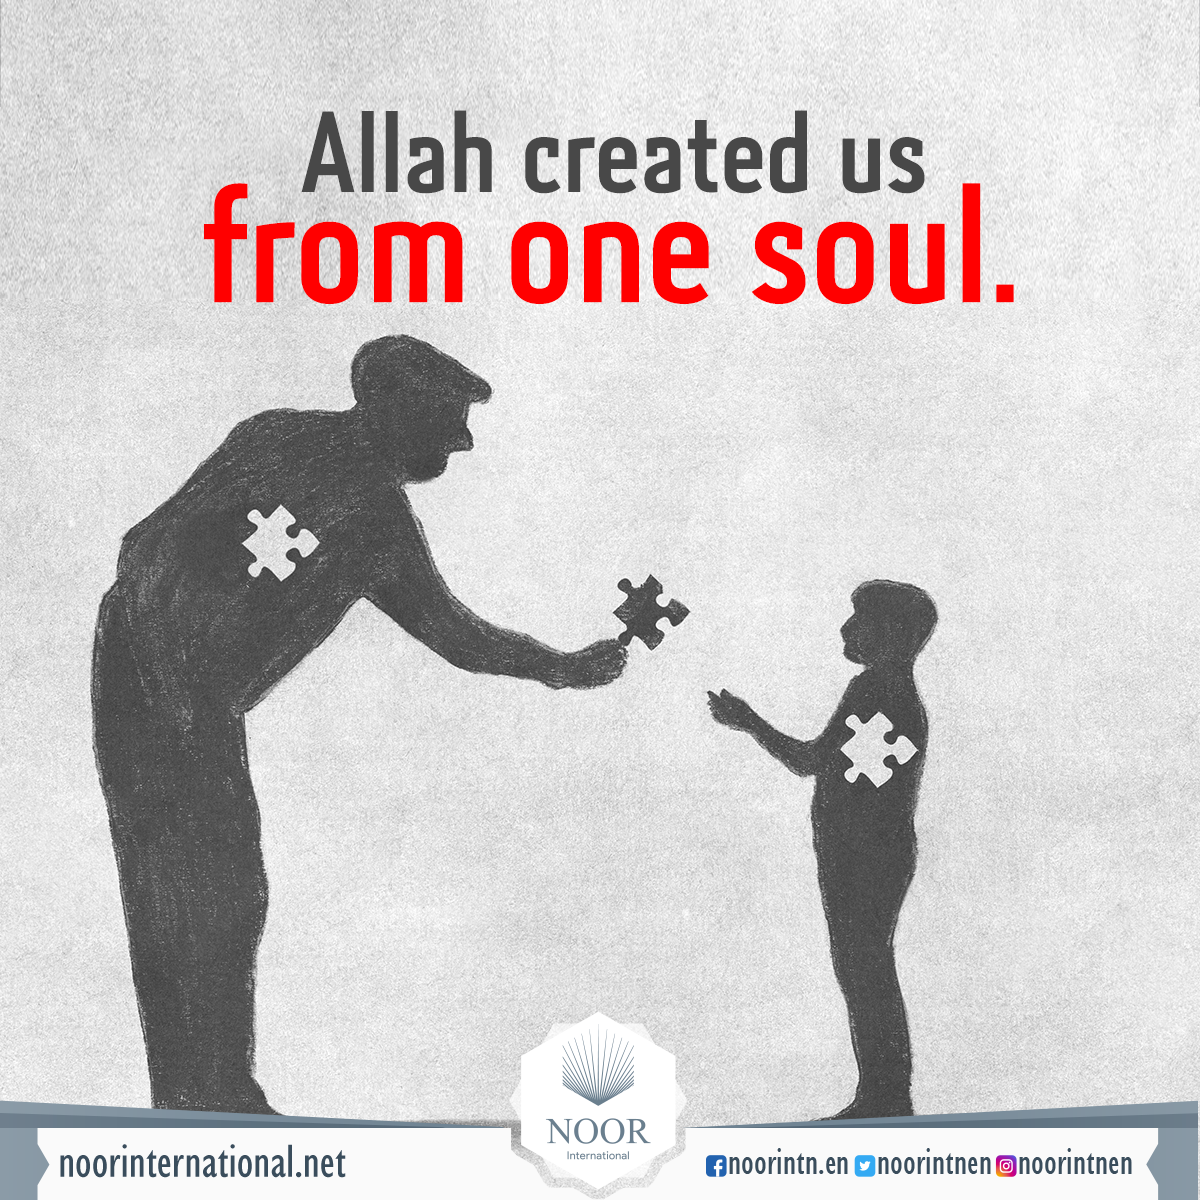 Allah created us from one soul.